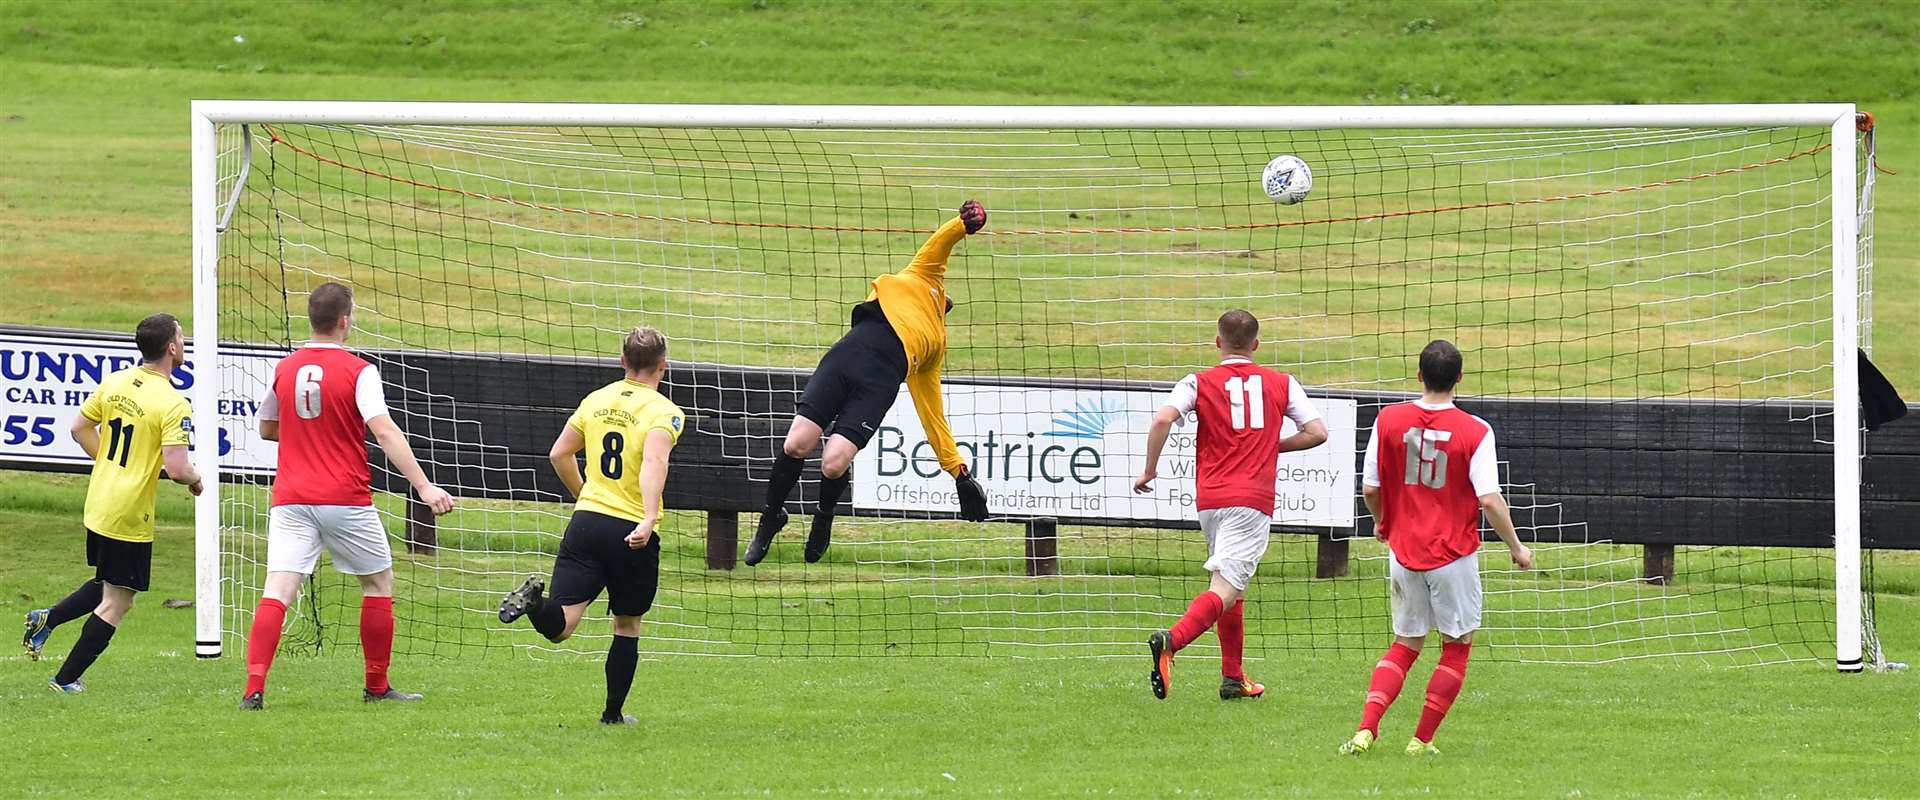 Orkney keeper Liam Valentine was unable to stop this effort from Craig Gunn (not in picture) for Wick's opening goal.